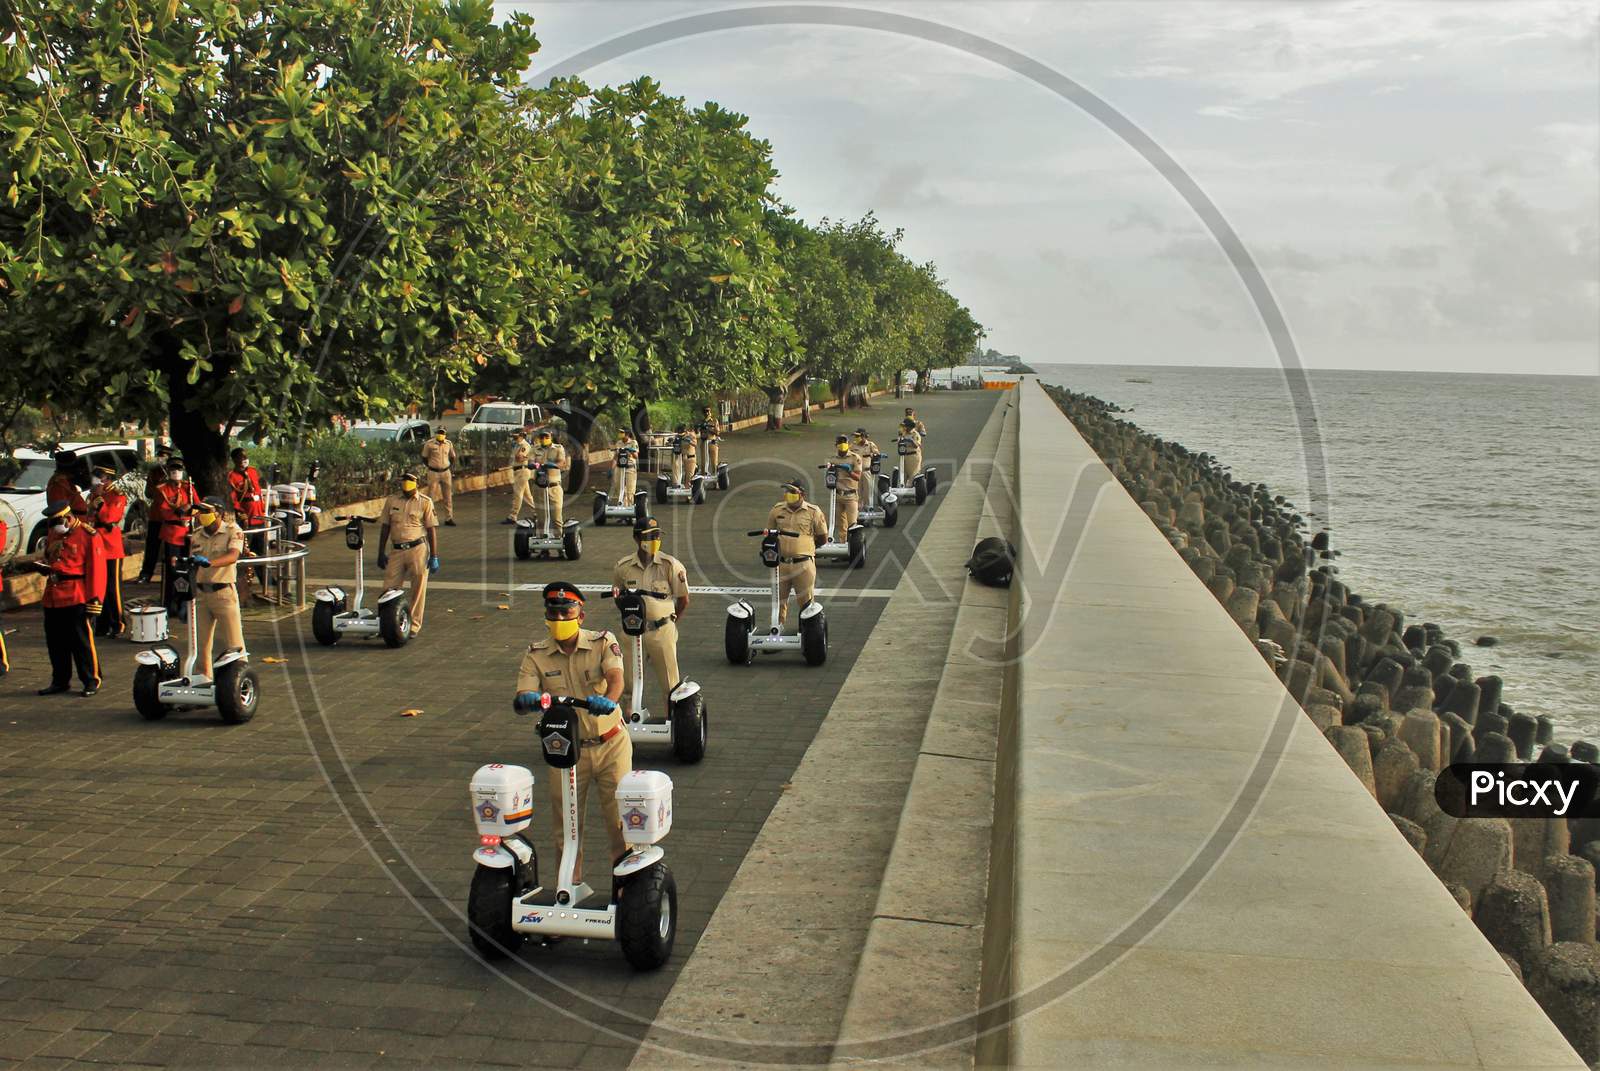 Mumbai Police officials ride Segways at the launch of ‘FREEGO self balancing scooter/Segway electric scooter’ for police patrolling on sea facing promenades in Mumbai, India on June 11, 2020.